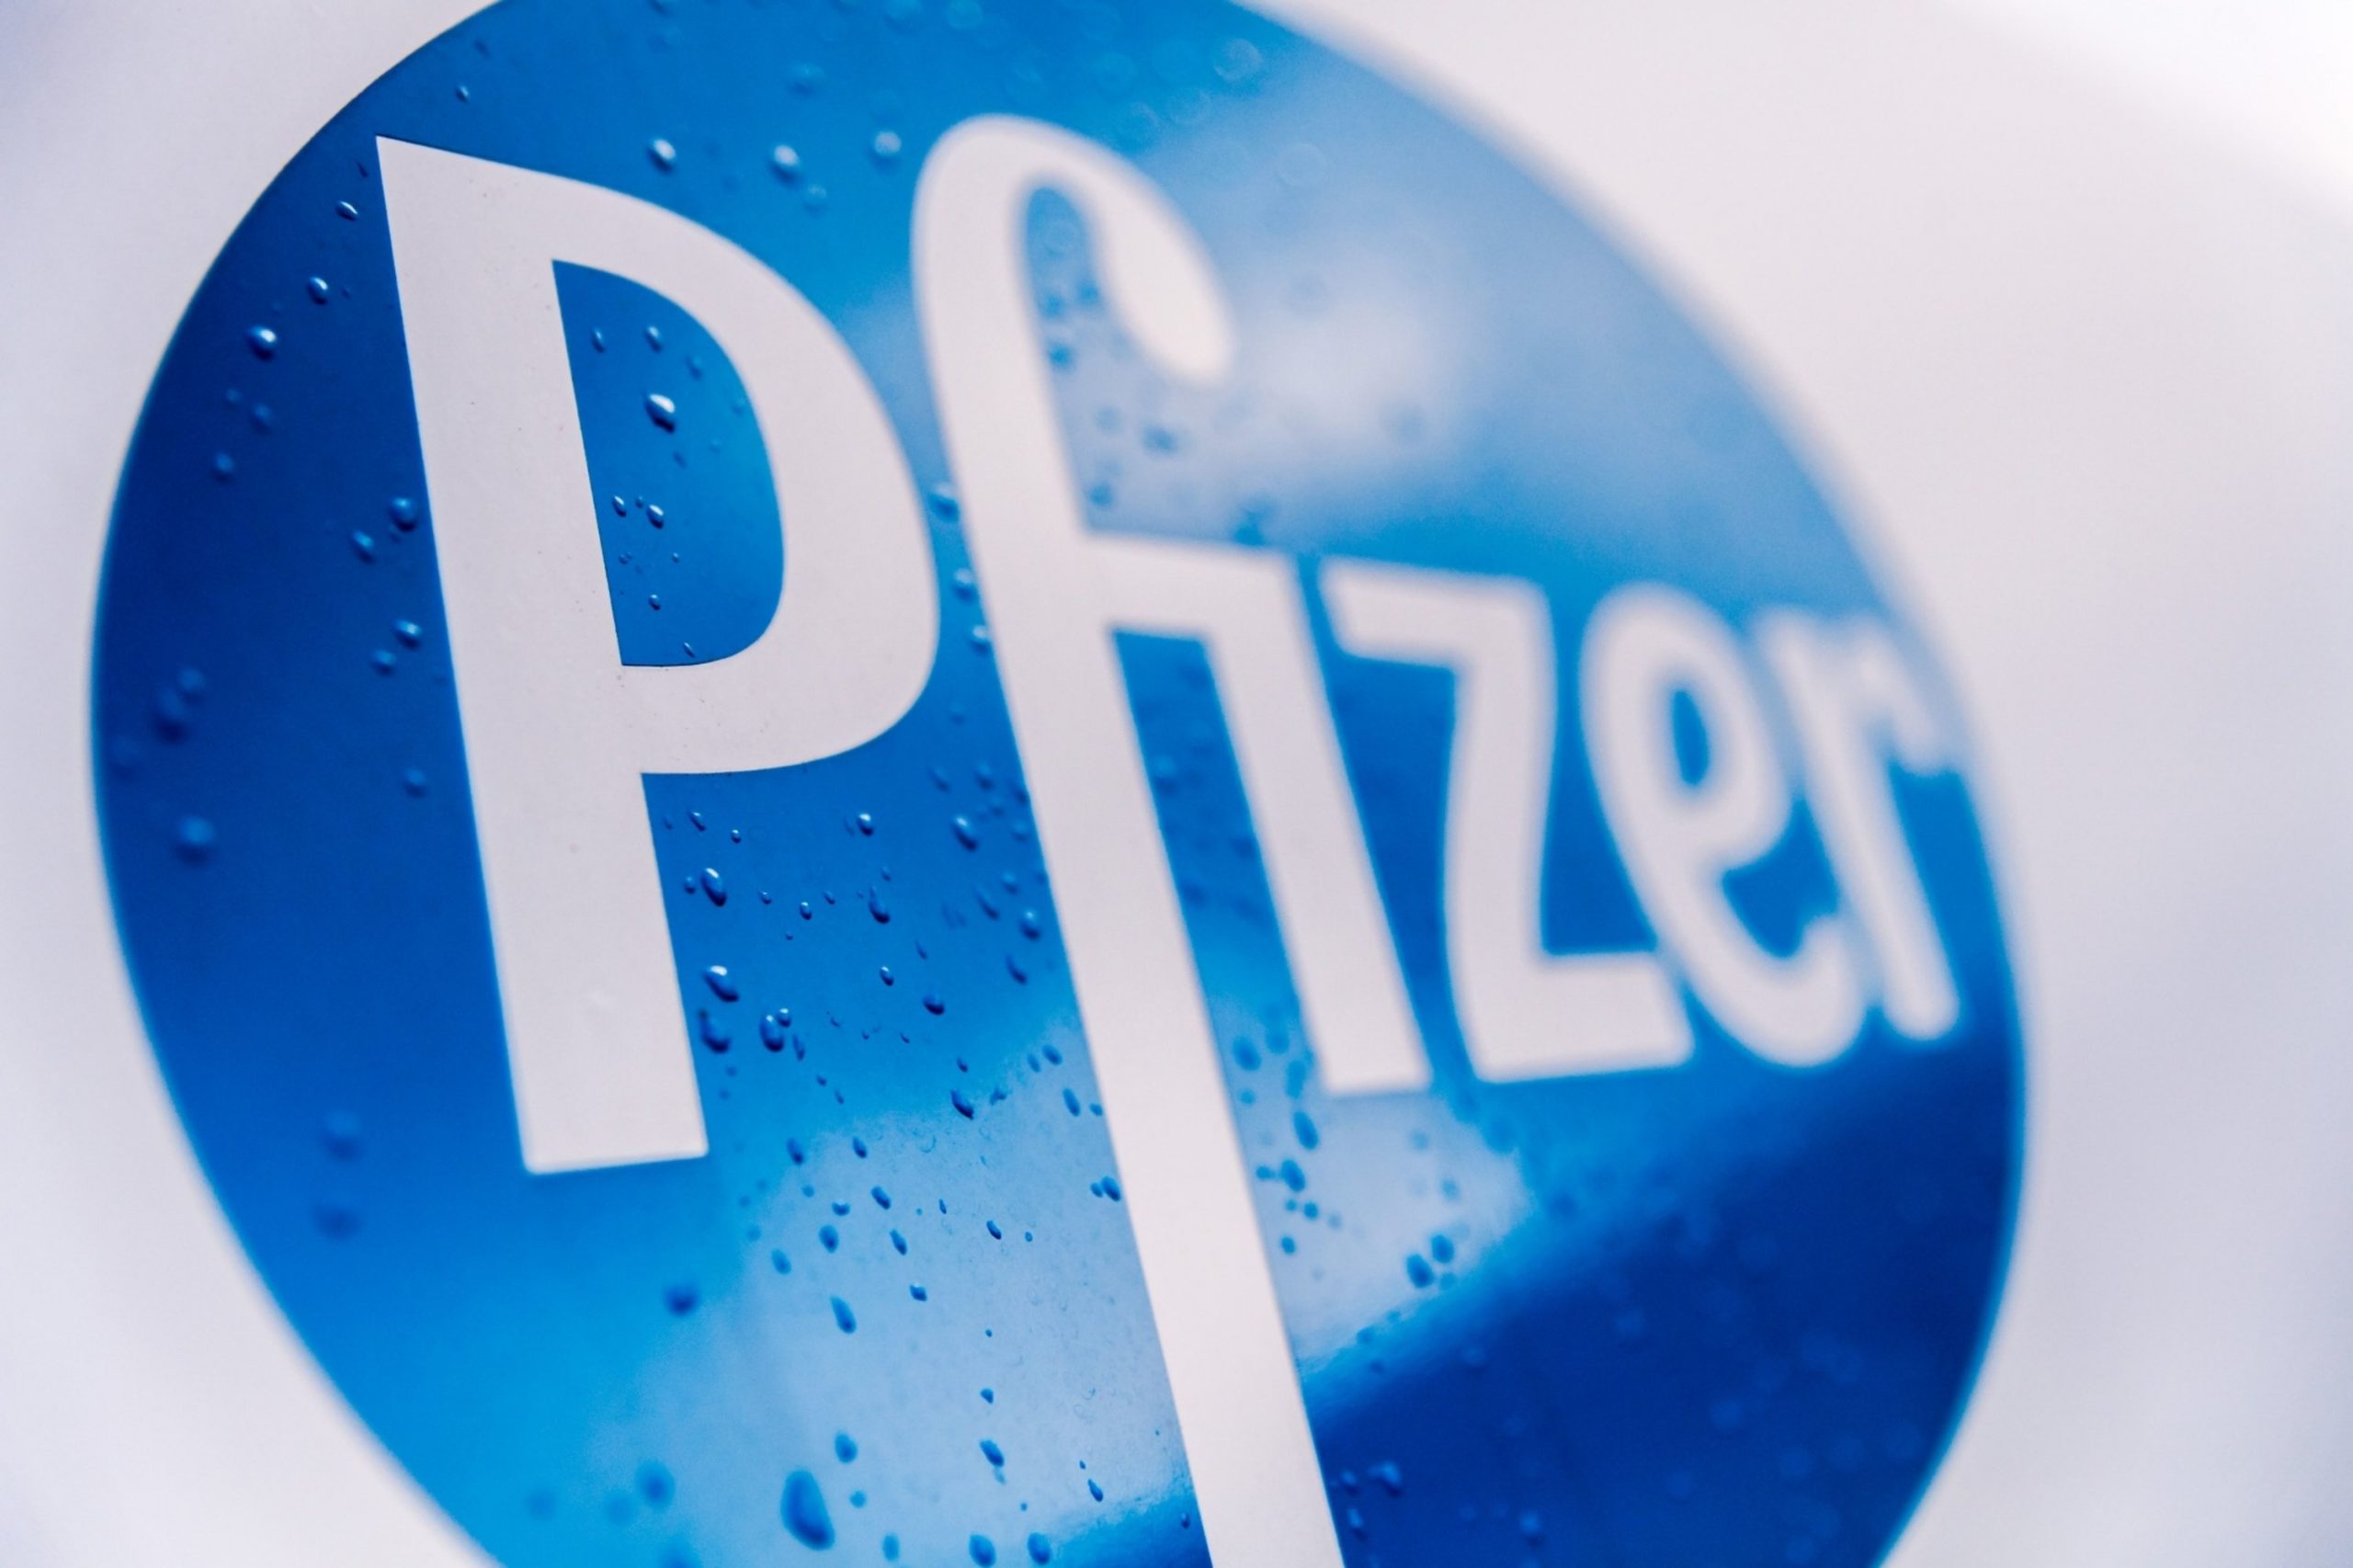 Pfizer says its COVID-19 pill cuts disease's worst risks by 89%